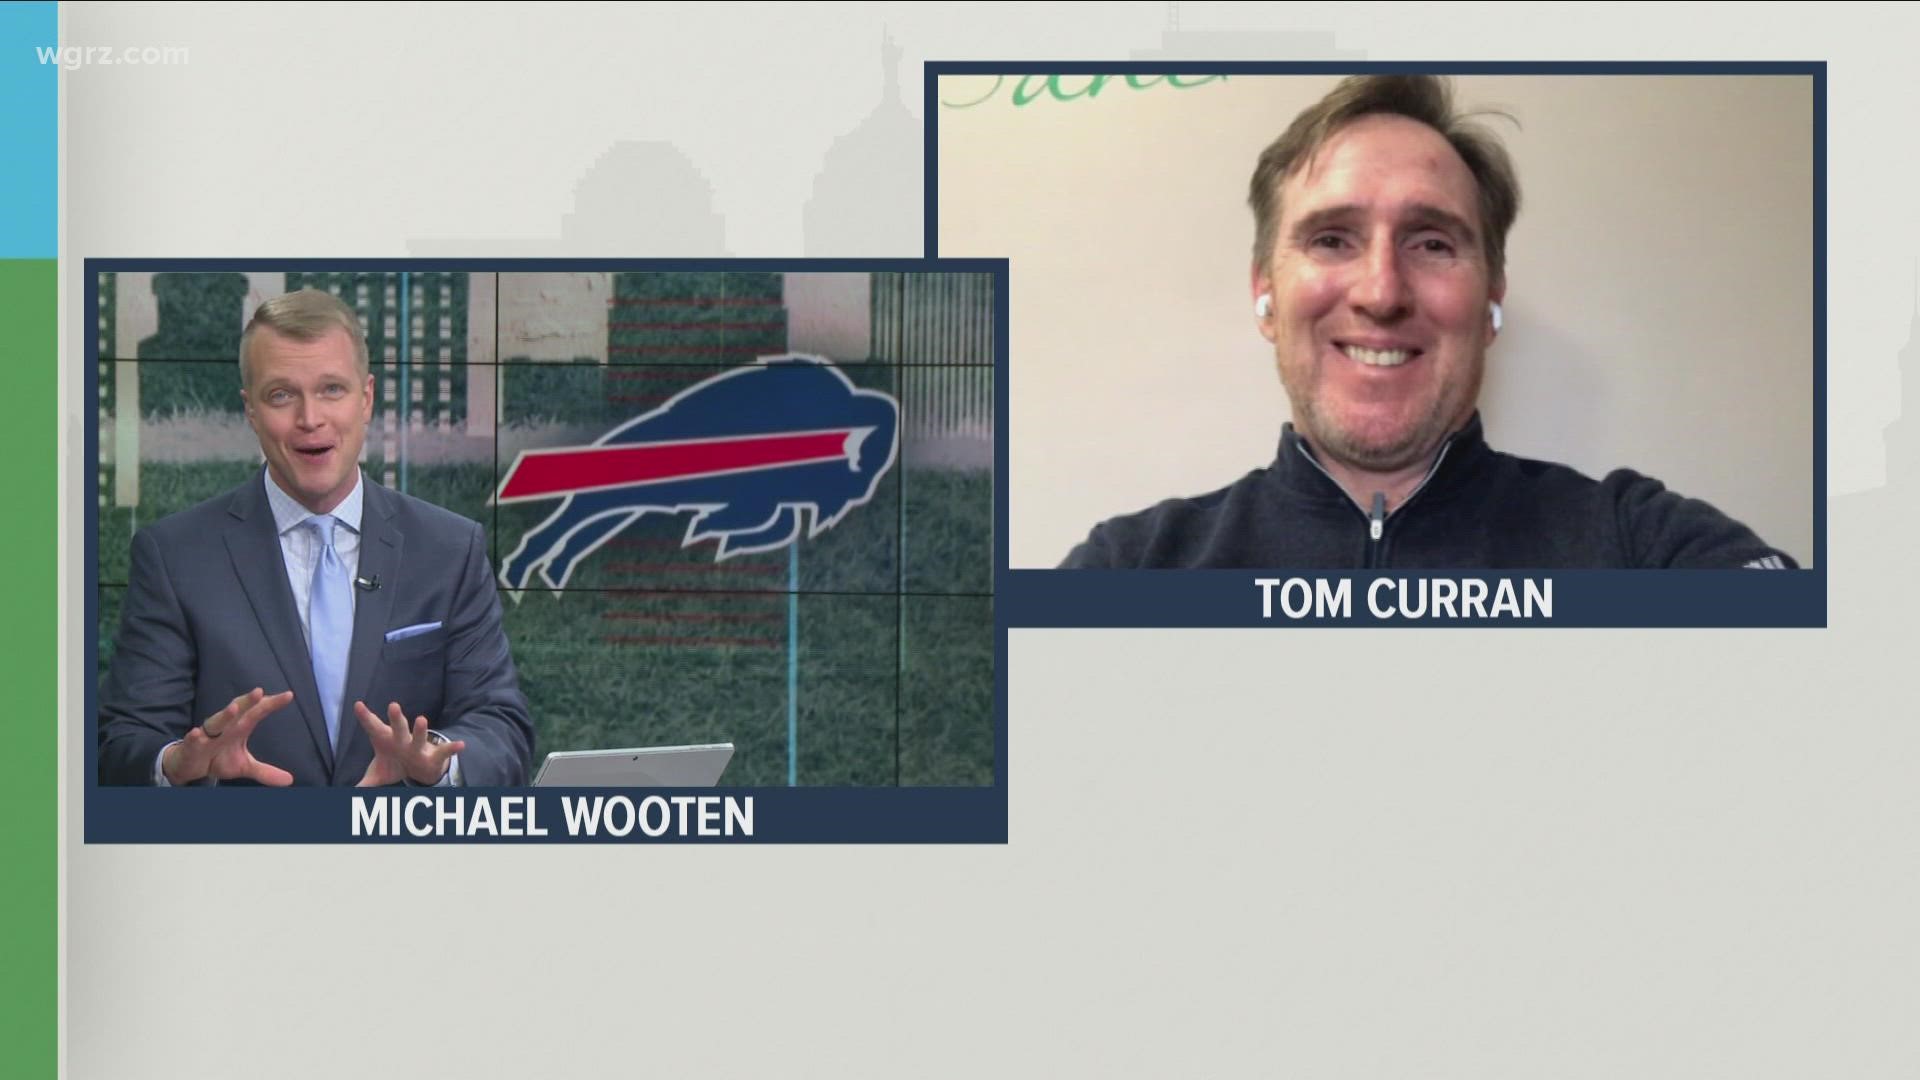 We wanted some perspective on the Bills-Patriots game this weekend from the other side of the field. Tom Curran cover the New England Patriots for NBC Boston.